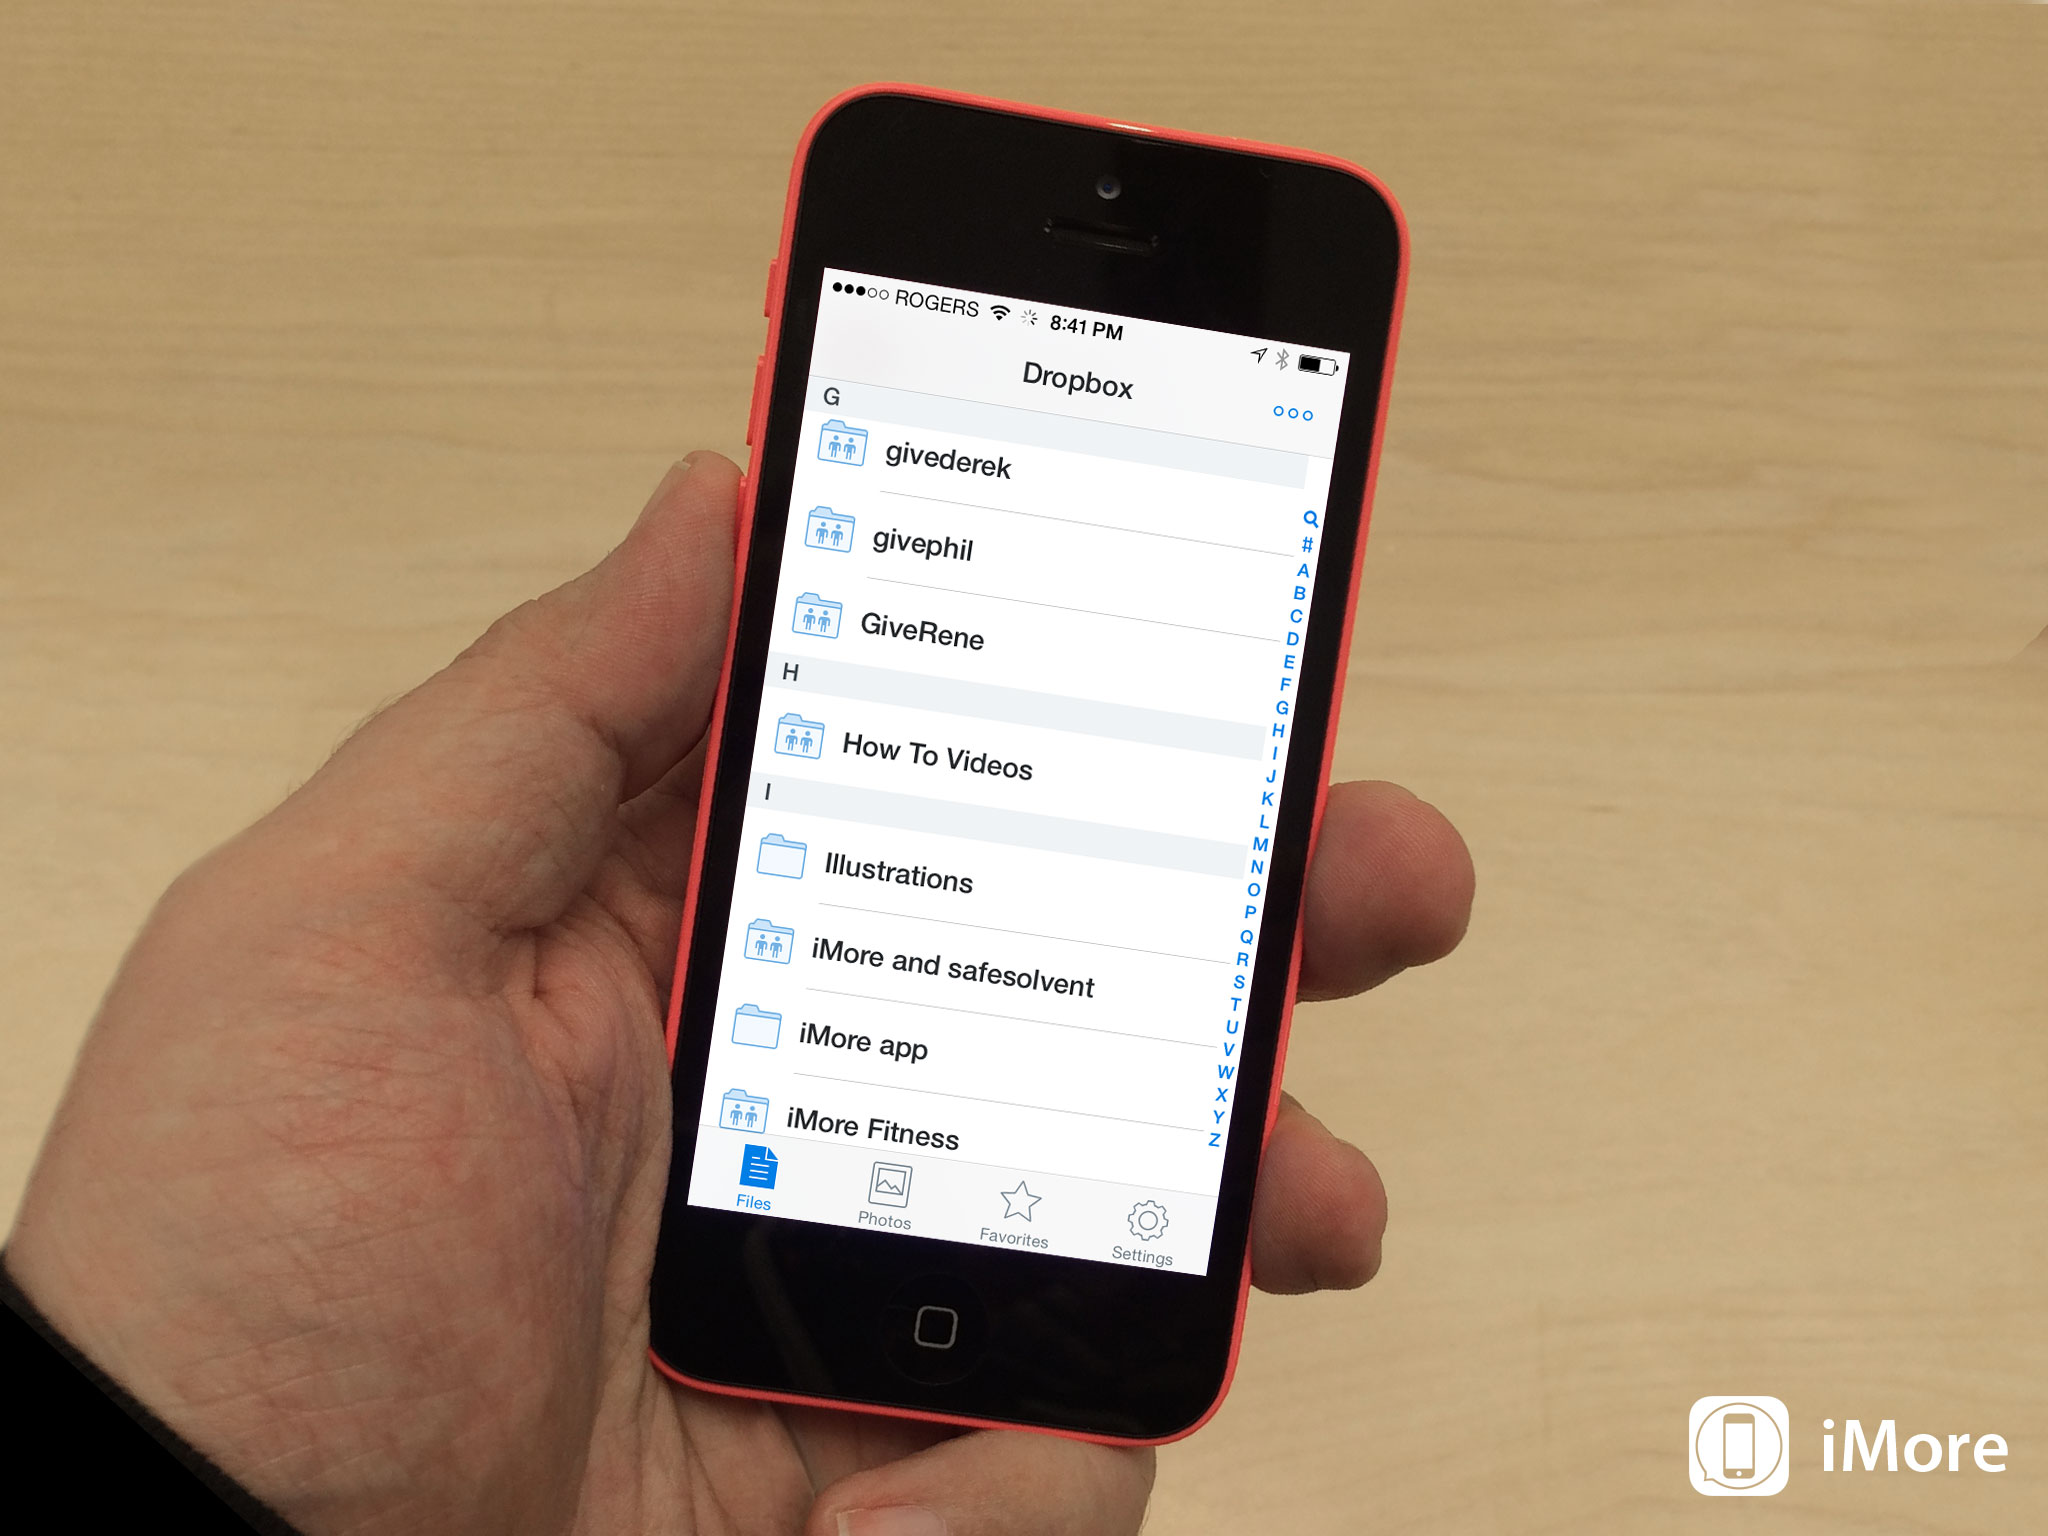 Dropbox 3.0 for iOS 7 brings new design, better sharing, video, and PDF handling